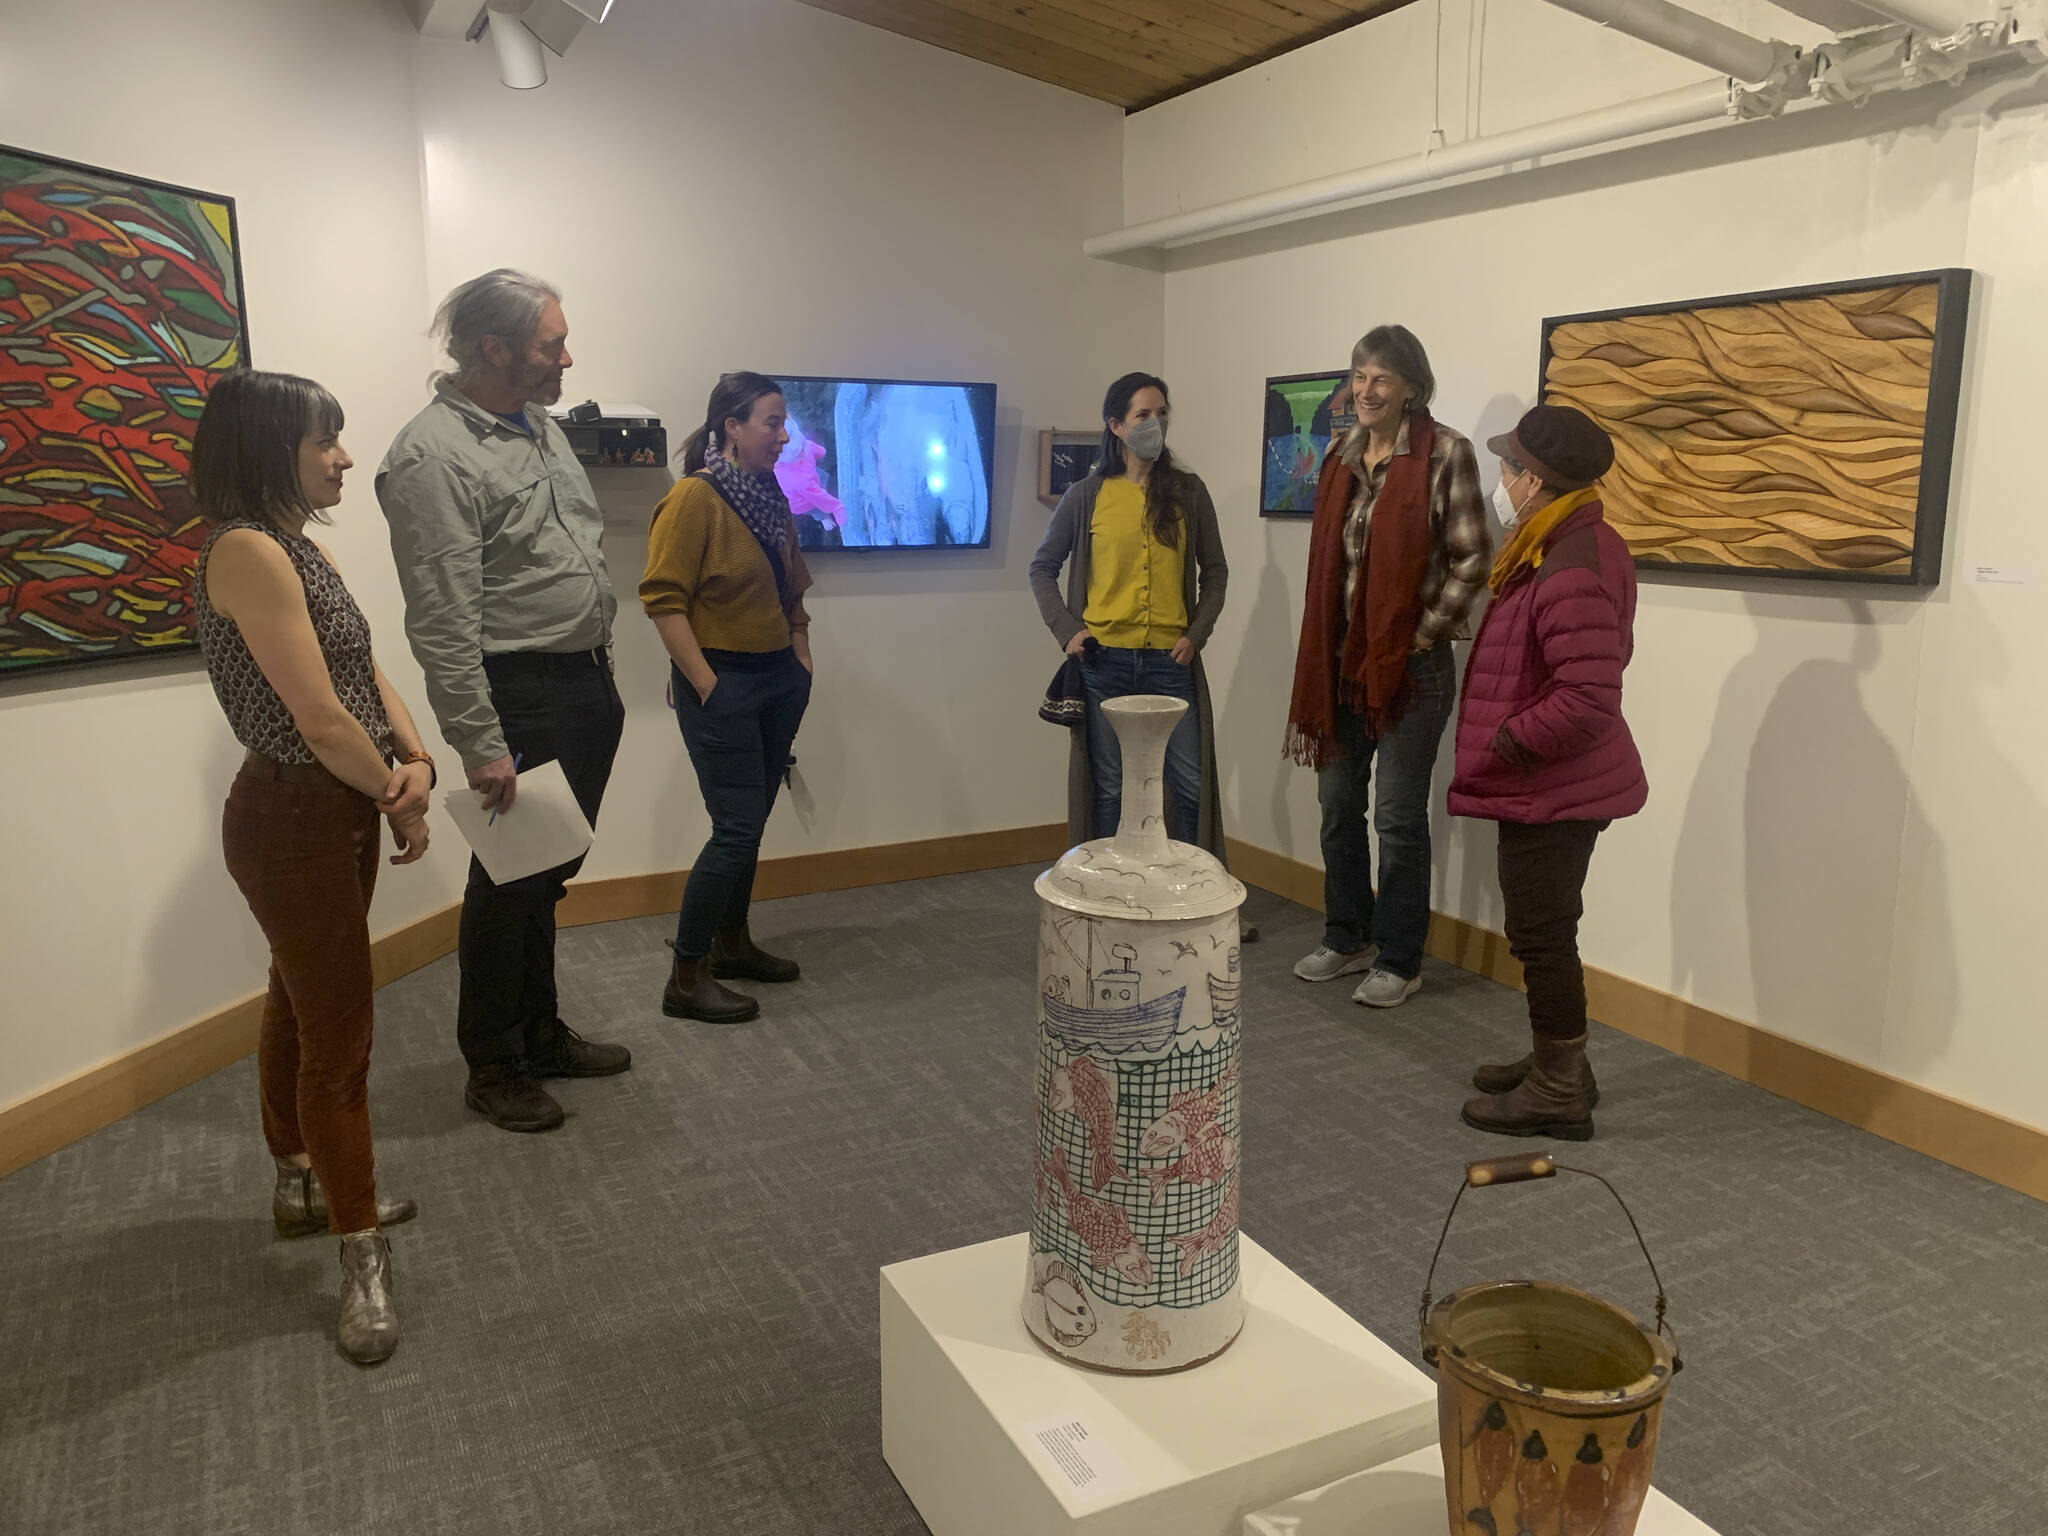 Carla Klinker Cope, far left, and Nadia Jackinski-Sethi, center, co-curators of thethe Pratt Museum & Park’s show “Salmon Culture: Kachemak Bay Connections,” discuss the show in a talk on Friday, Nov. 3, 2022, at the museum. (Photo by Christina Whiting)